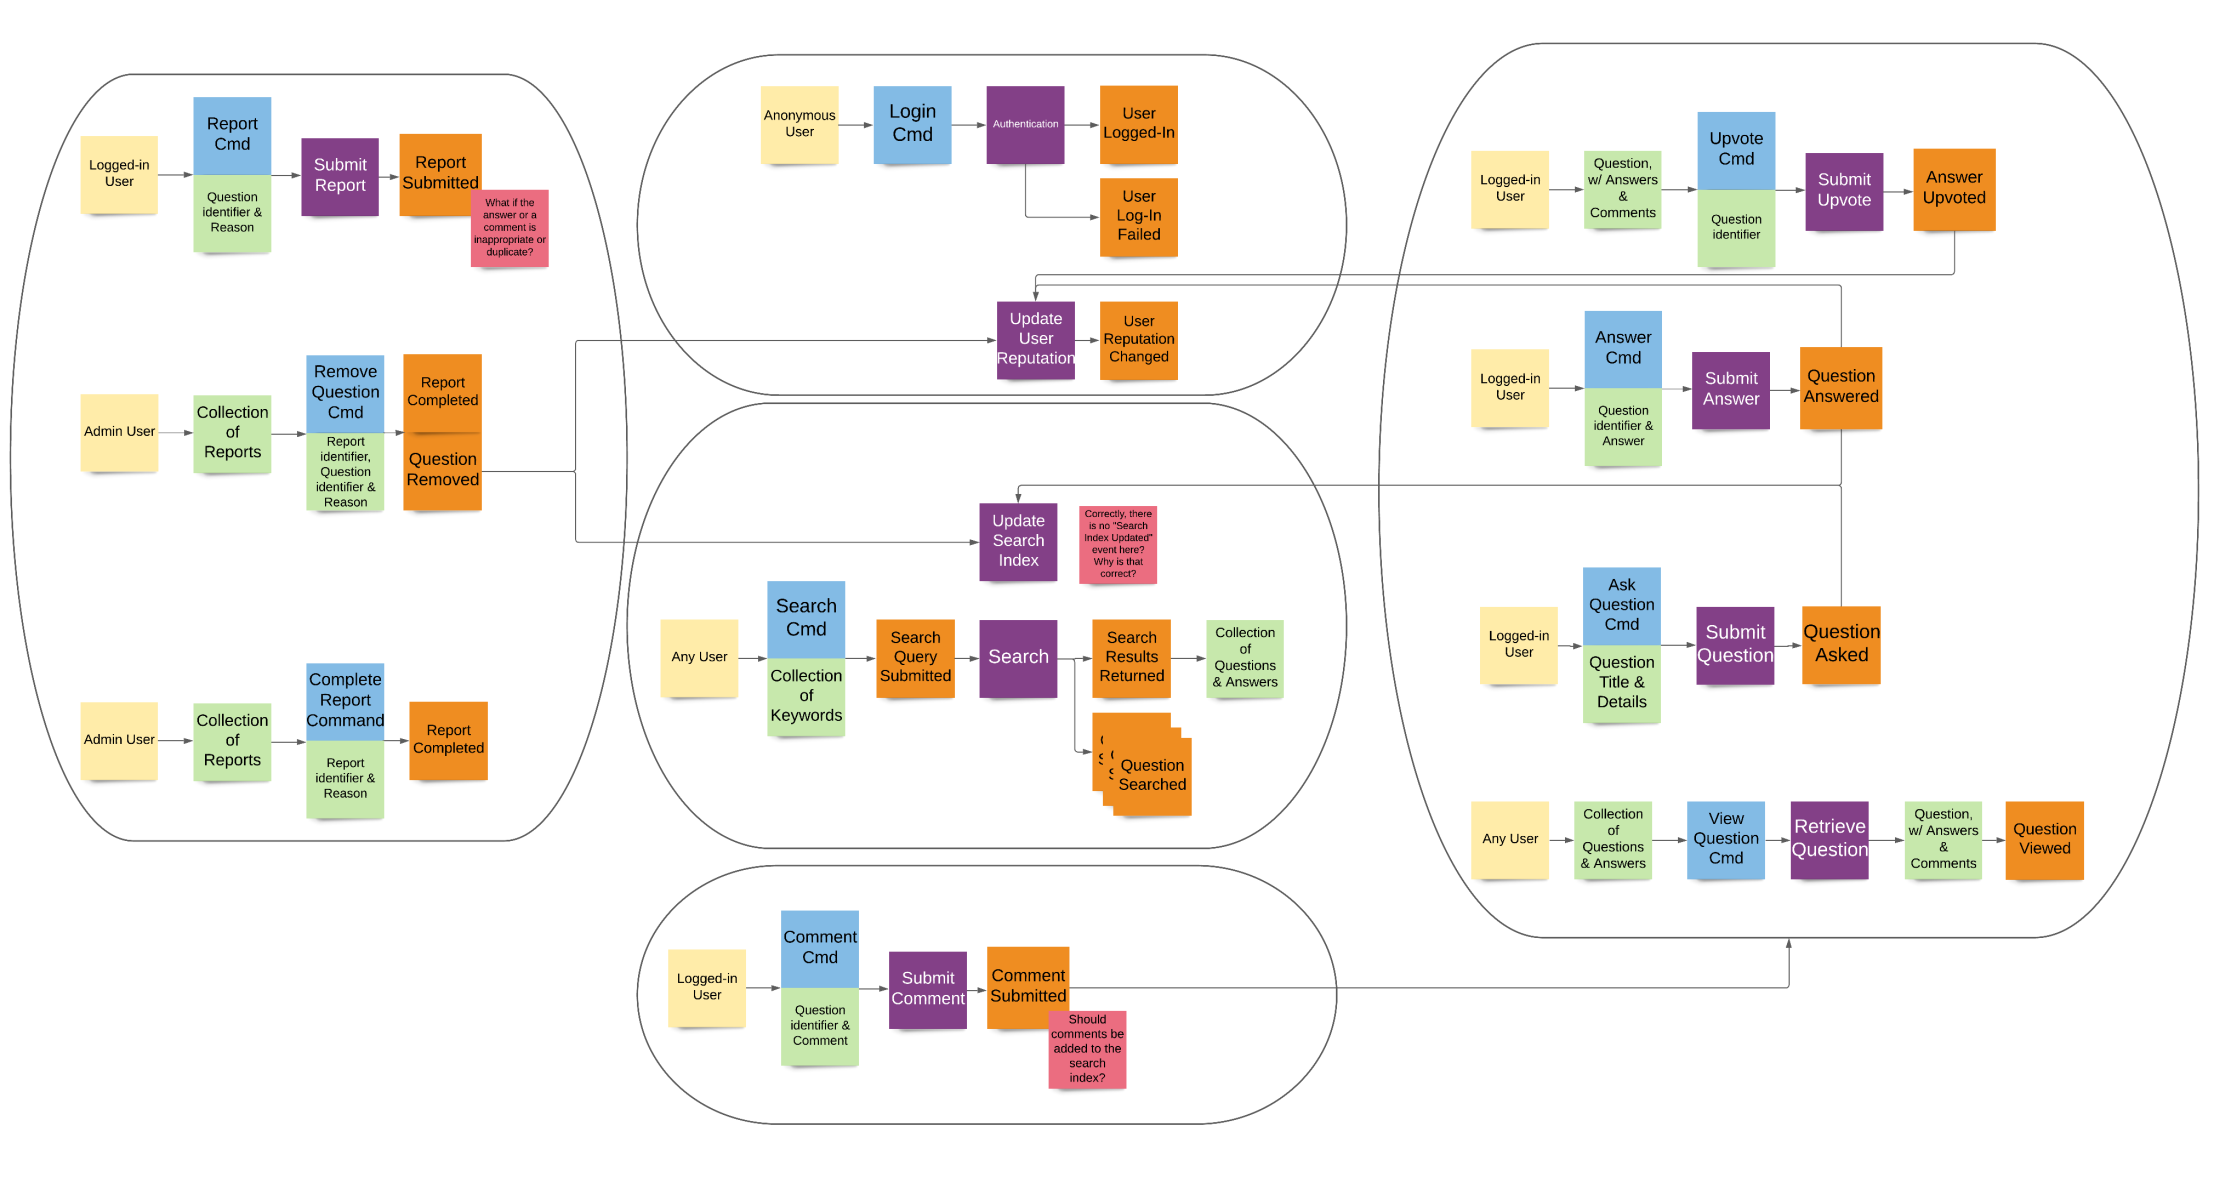 Event Storming - Q&A Domain Sample - Step 4 - Aggregate - 2231x1200.png